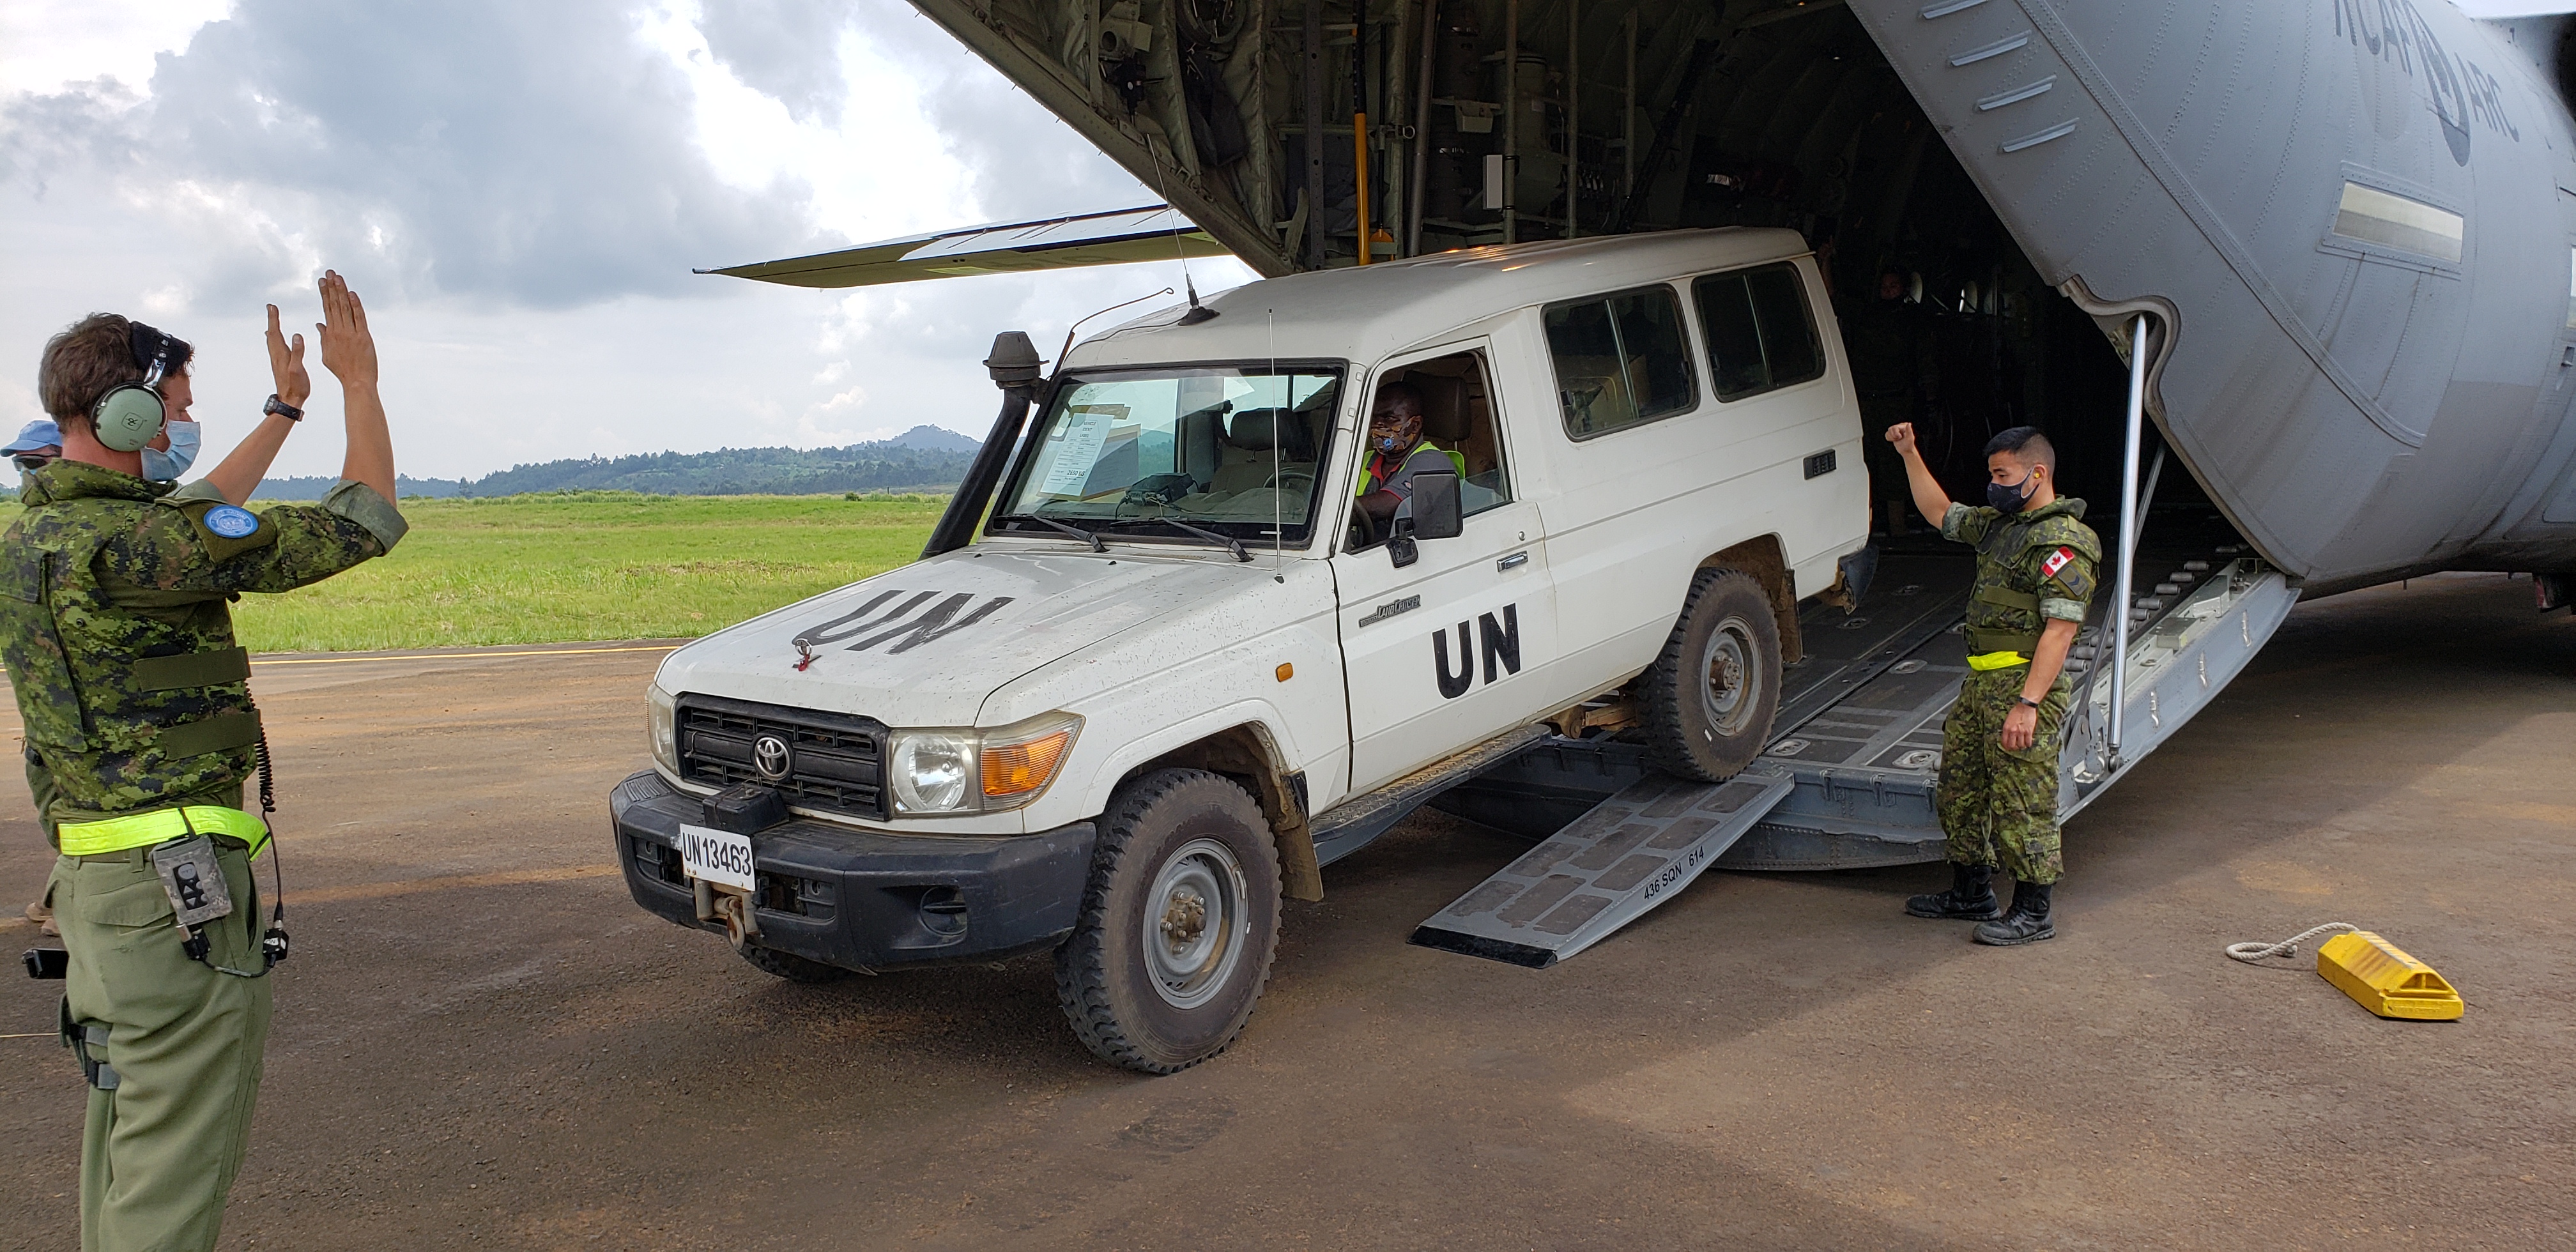 A United Nations vehicle is unloaded from a Royal Canadian Air Force CC-130J Hercules on October 13, 2020. The aircraft detachment is operating as part of Operation PRESENCE based out of Entebbe Uganda, providing tactical airlift throughout the region in support of United Nations Peacekeeping efforts. PHOTO: DND